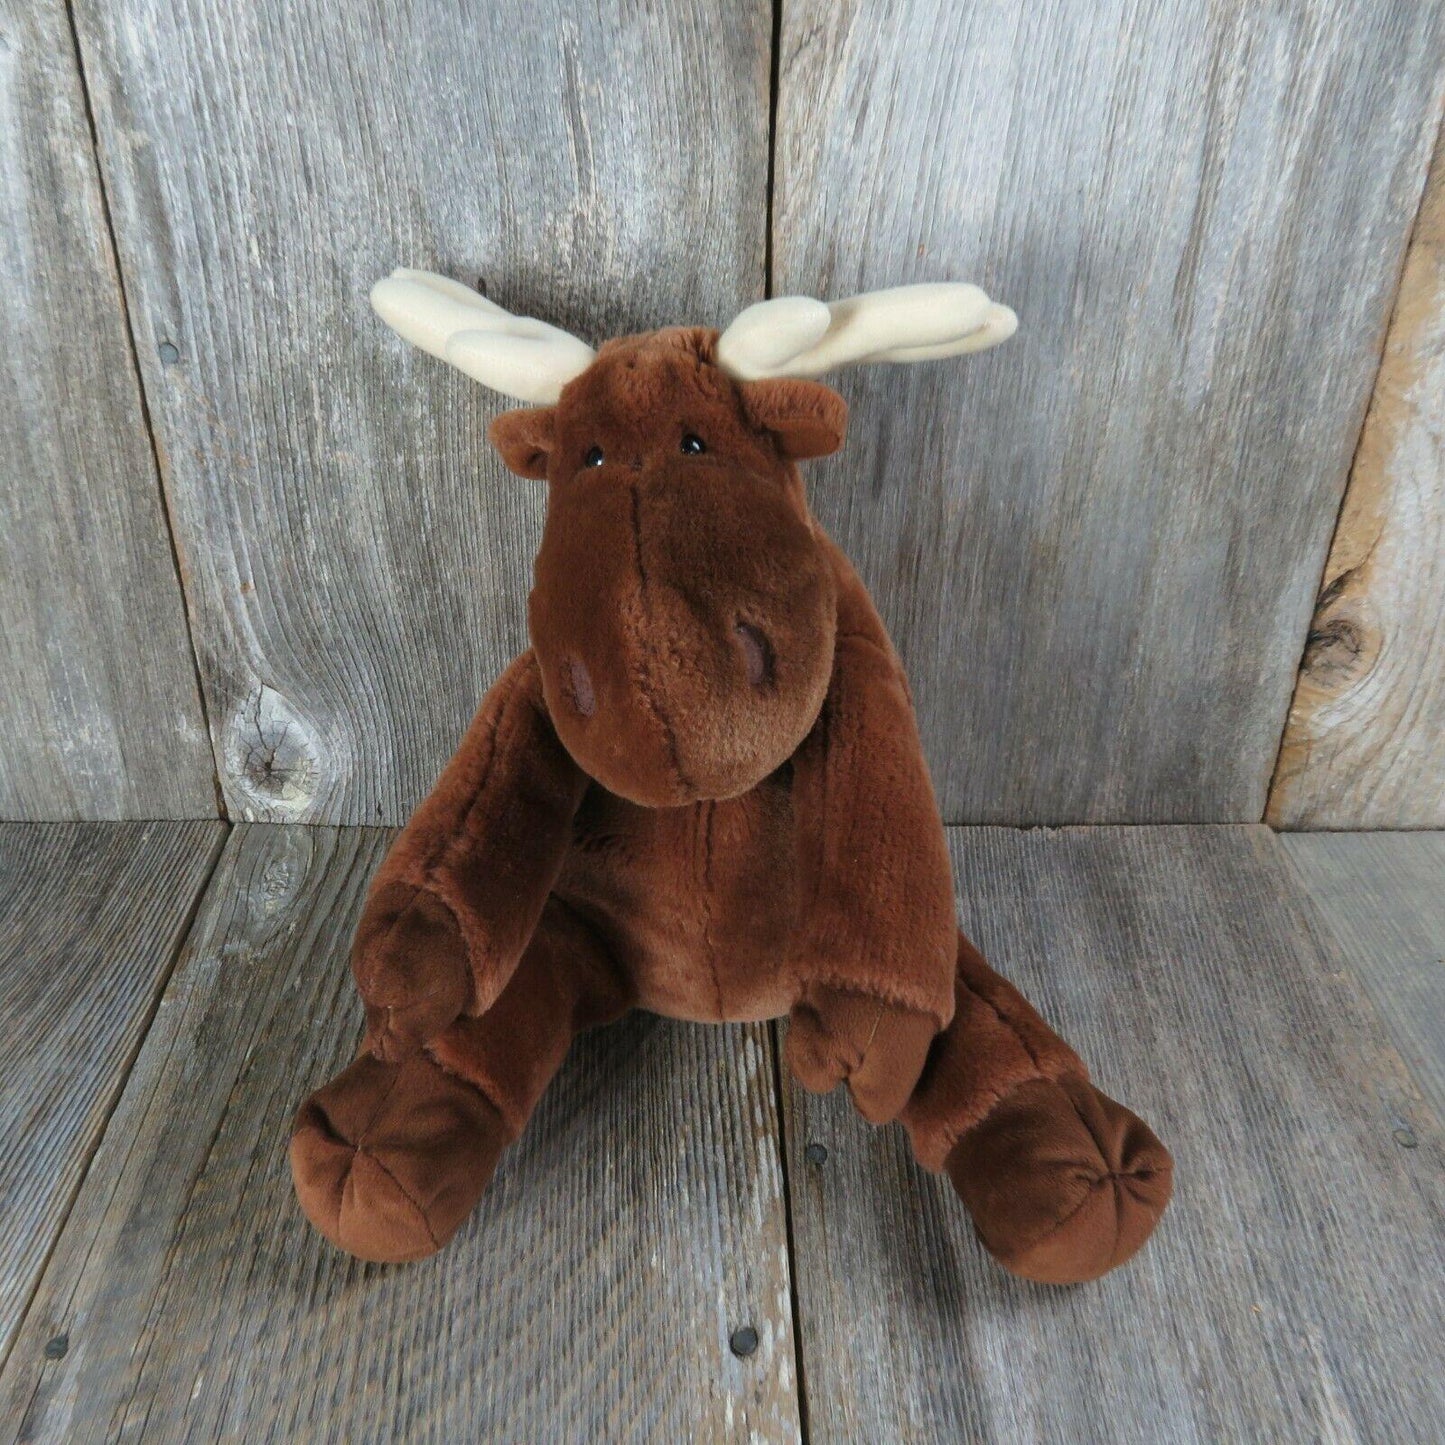 If You Give a Moose A Muffin Plush Brown Stuffed Animal Kohls Cares